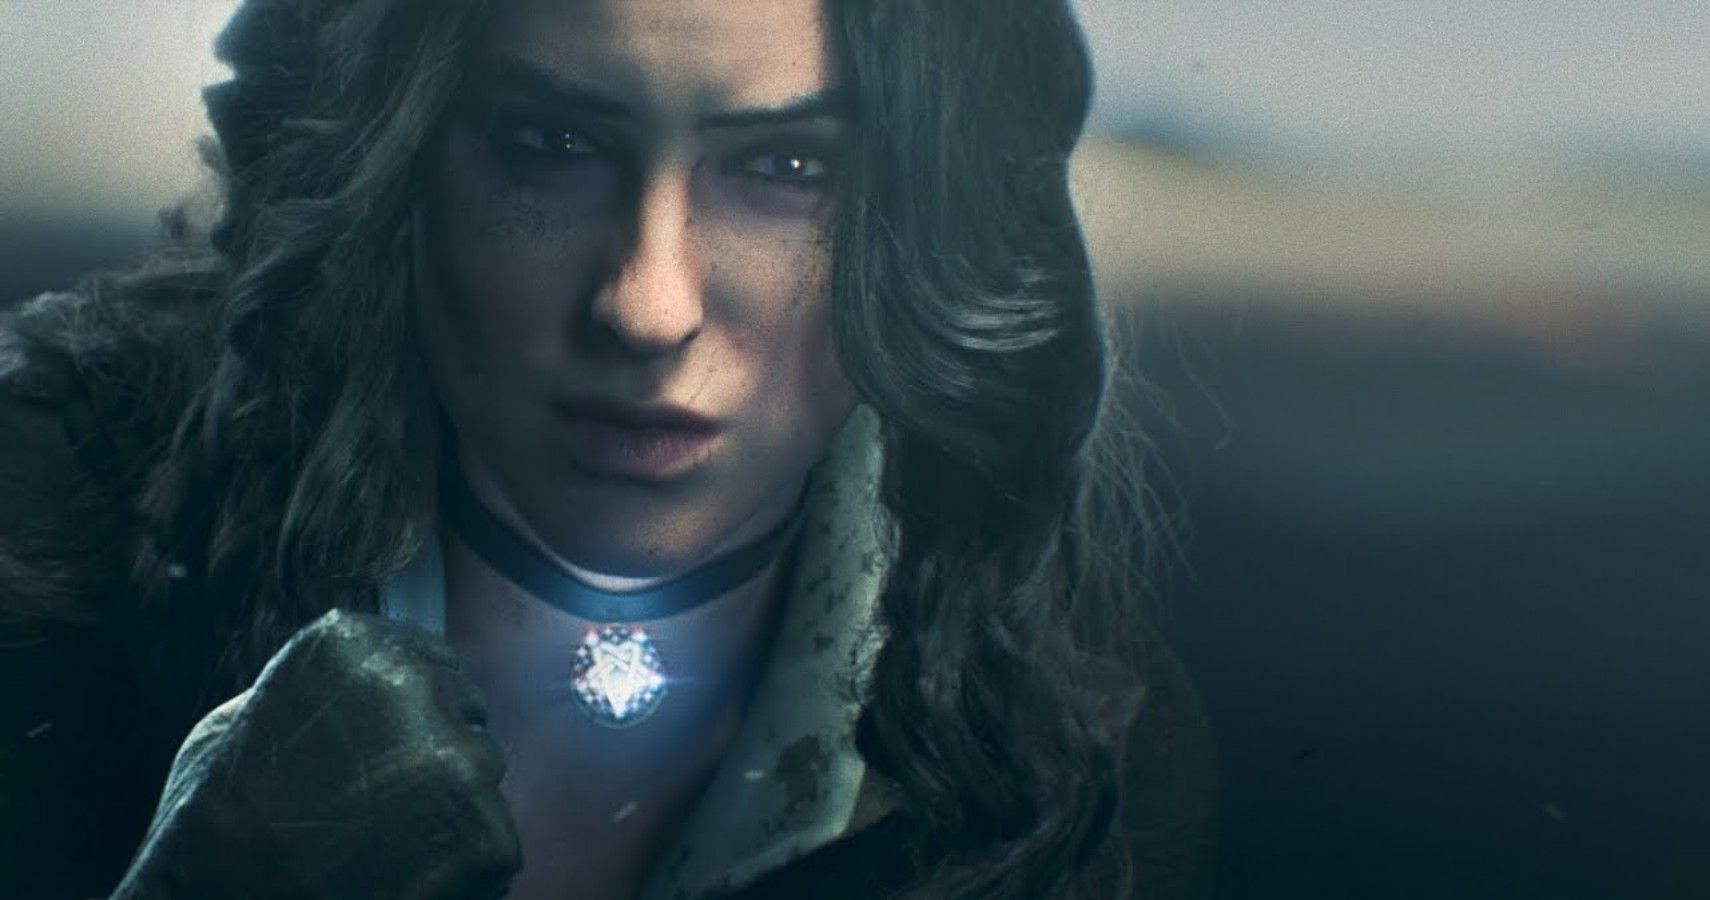 Yennefer of Vengerberg is bound to make an impact in your life!